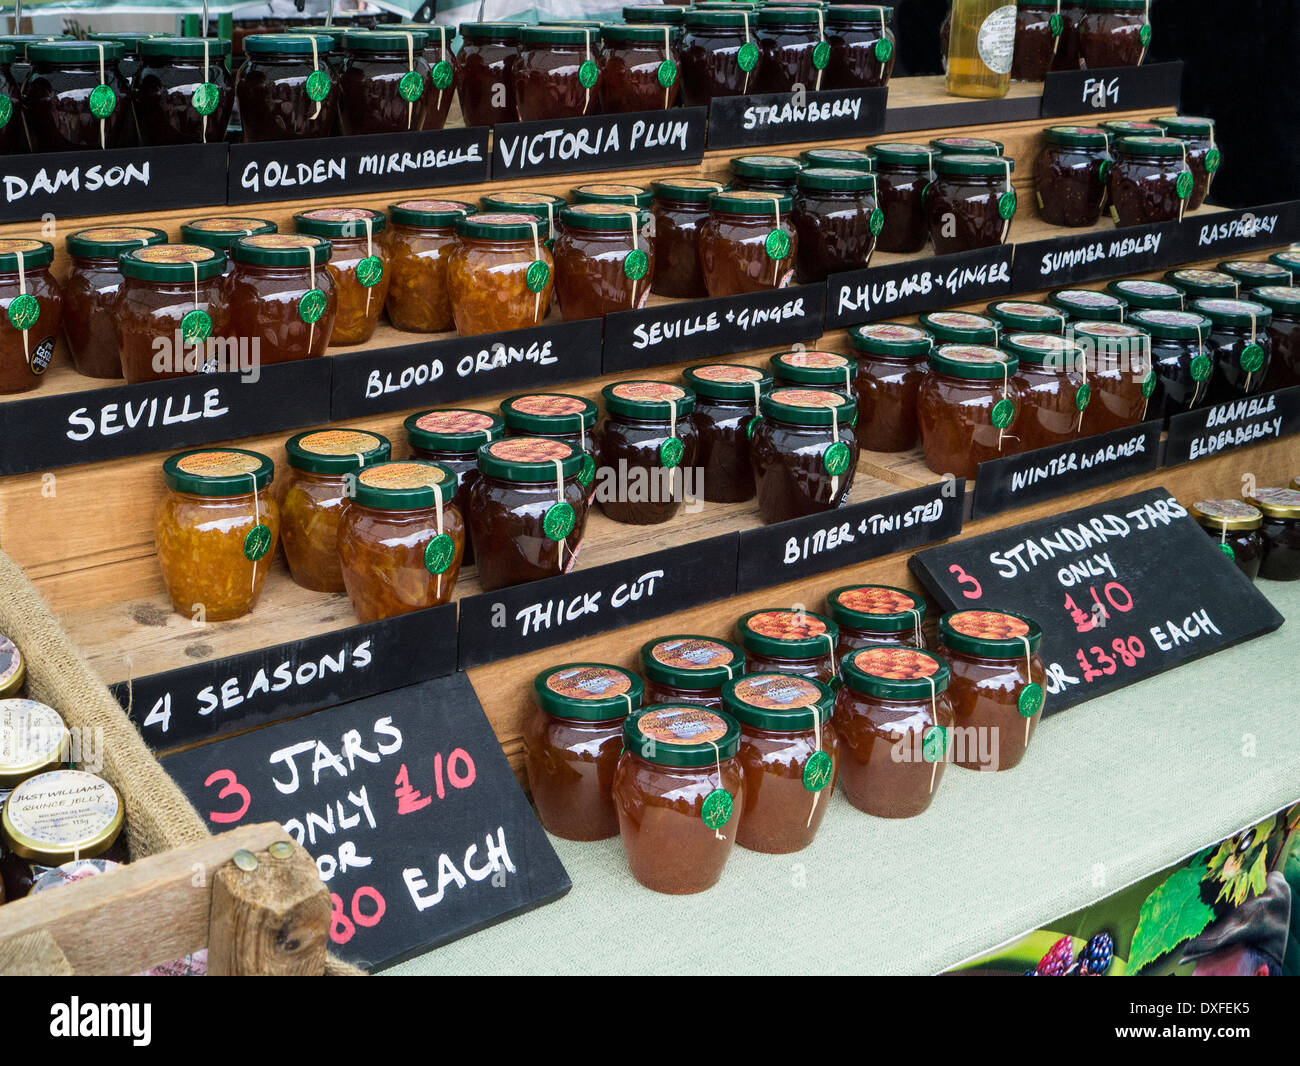 Market stall selling locally made Marmalade and Jams (Jelly) - Yorkshire in northeast England. Stock Photo